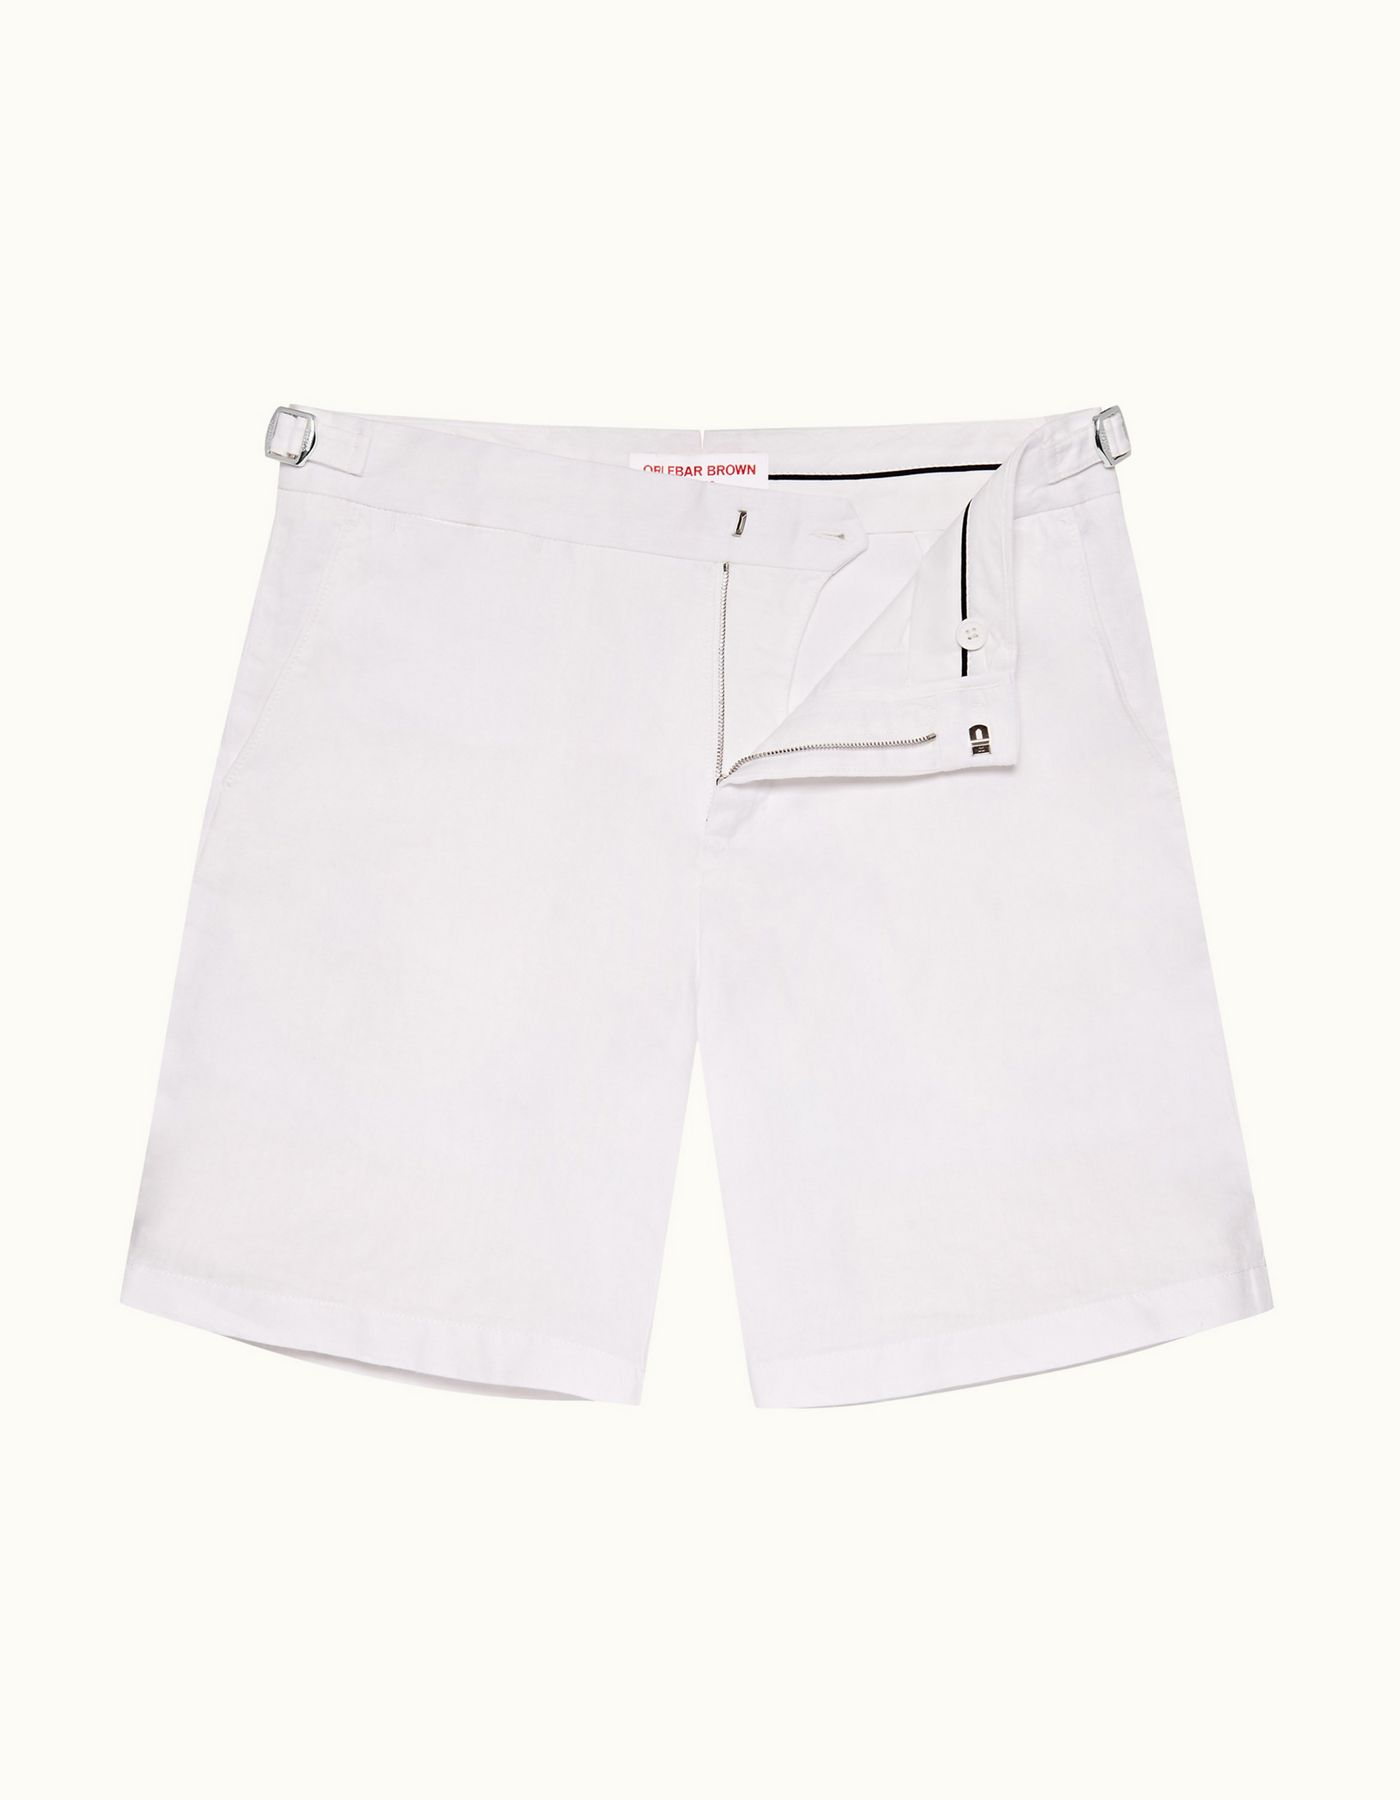 Norwich Linen - Mens Sea Mist Tailored Fit Washed Linen Shorts